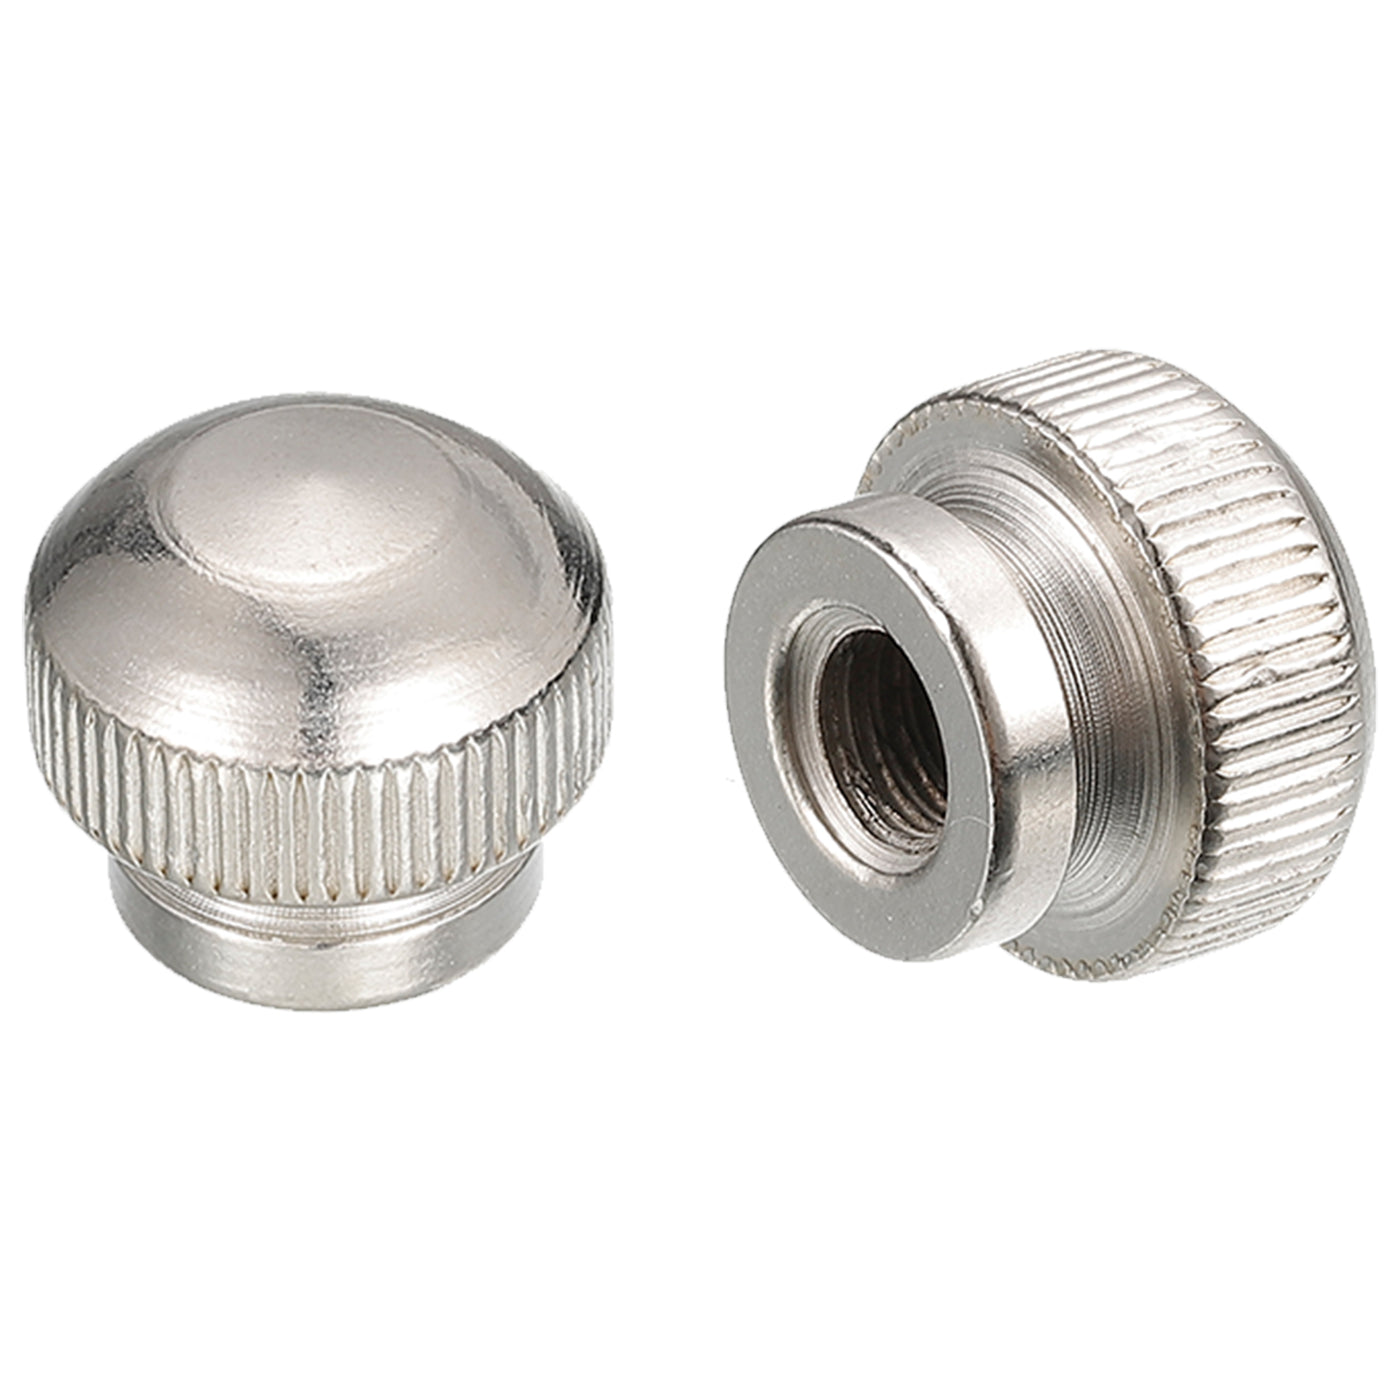 uxcell Uxcell Knurled Thumb Nuts,Carbon Steel Knurled Nut with Collar High Head Blind Hole Knurled Thumb Nuts